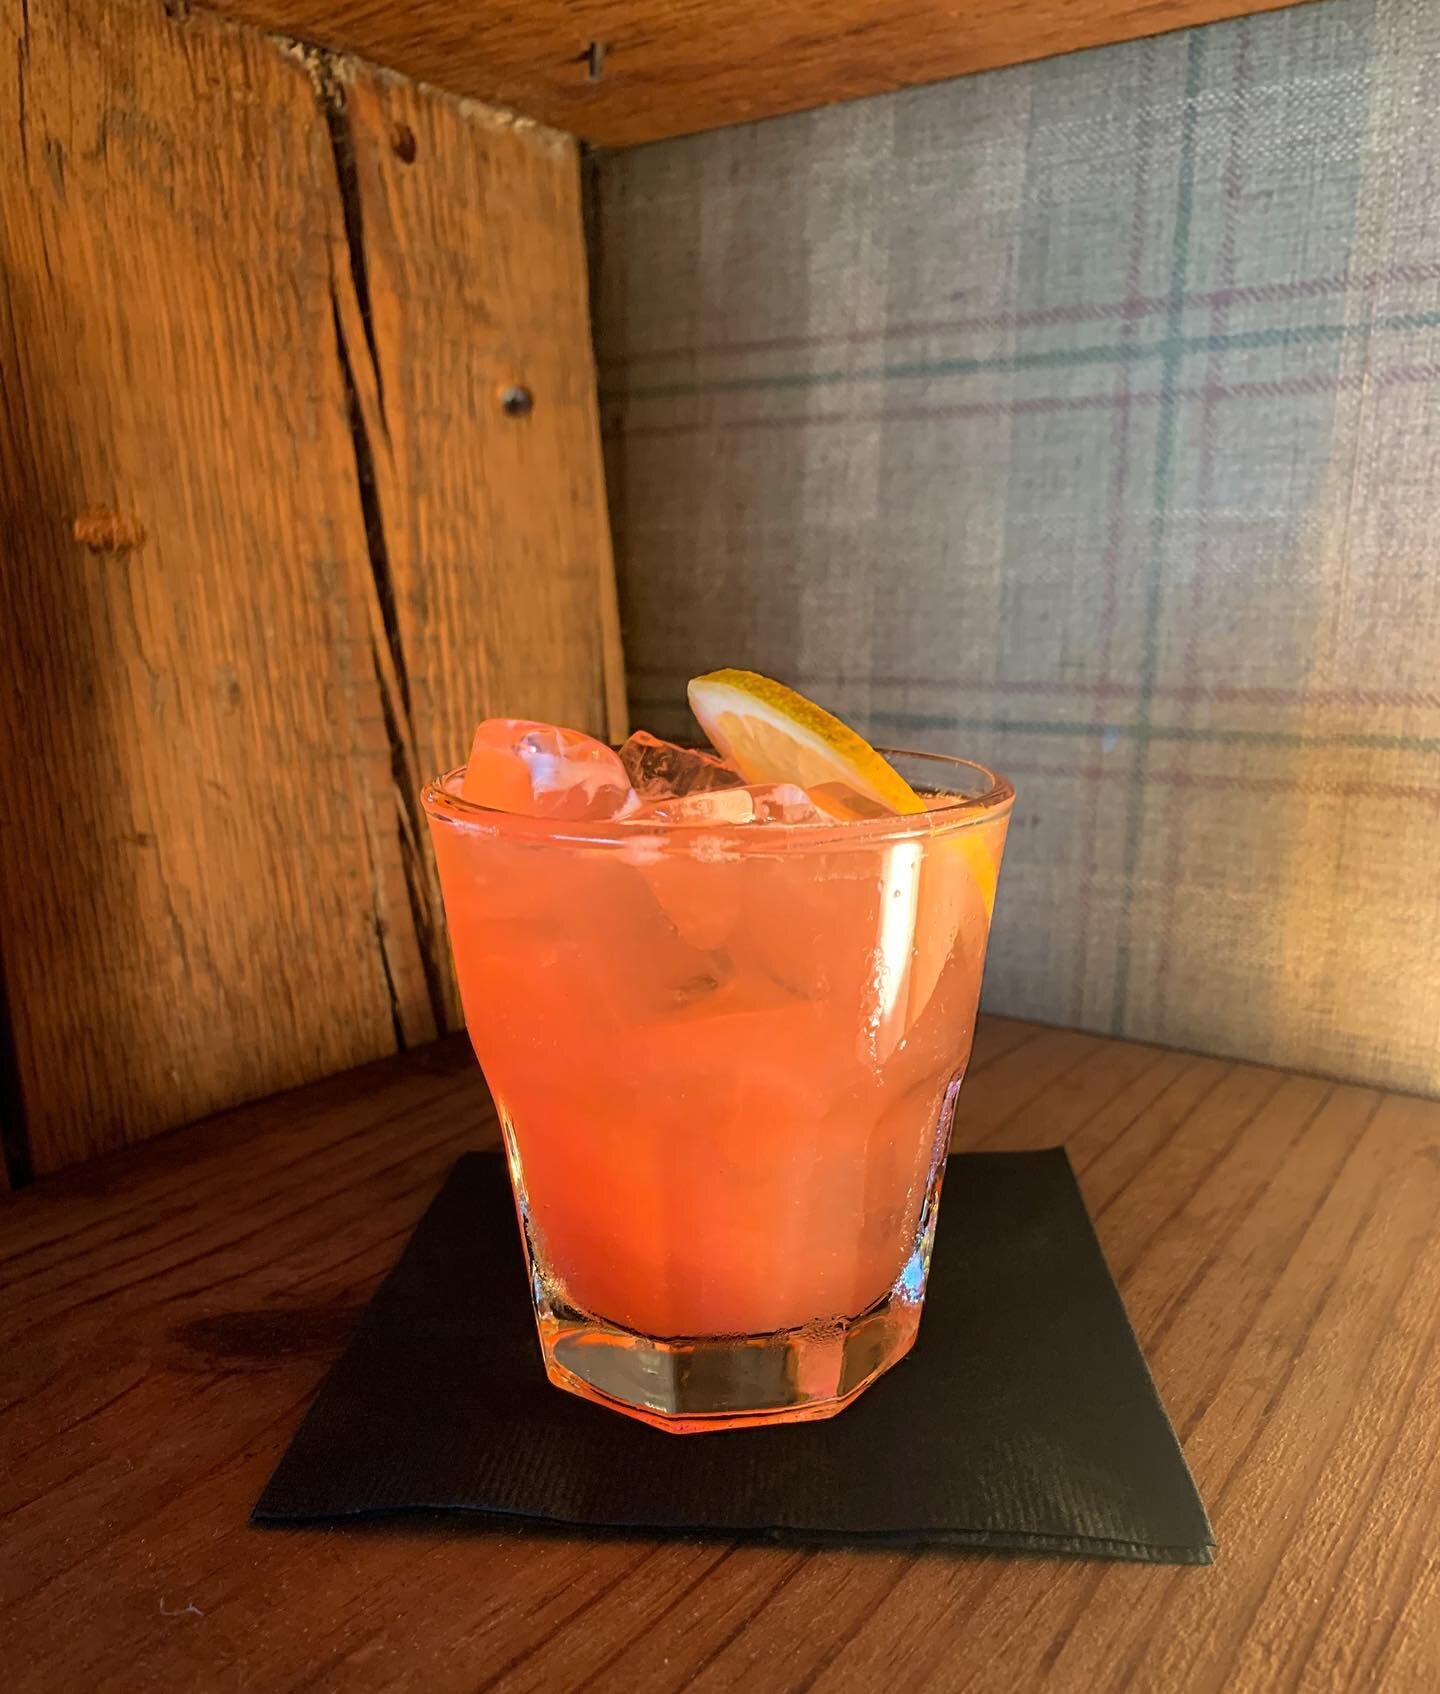 Come out &amp; enjoy our new cocktail of the week &amp; dance your butt off before the 🌧 comes this weekend!!

&ldquo;Mouth Breather&rdquo;
Willhaven Lodge American Whiskey
Blood Orange
Nam Doc Mai Mango
Xocolatl Mole Bitters